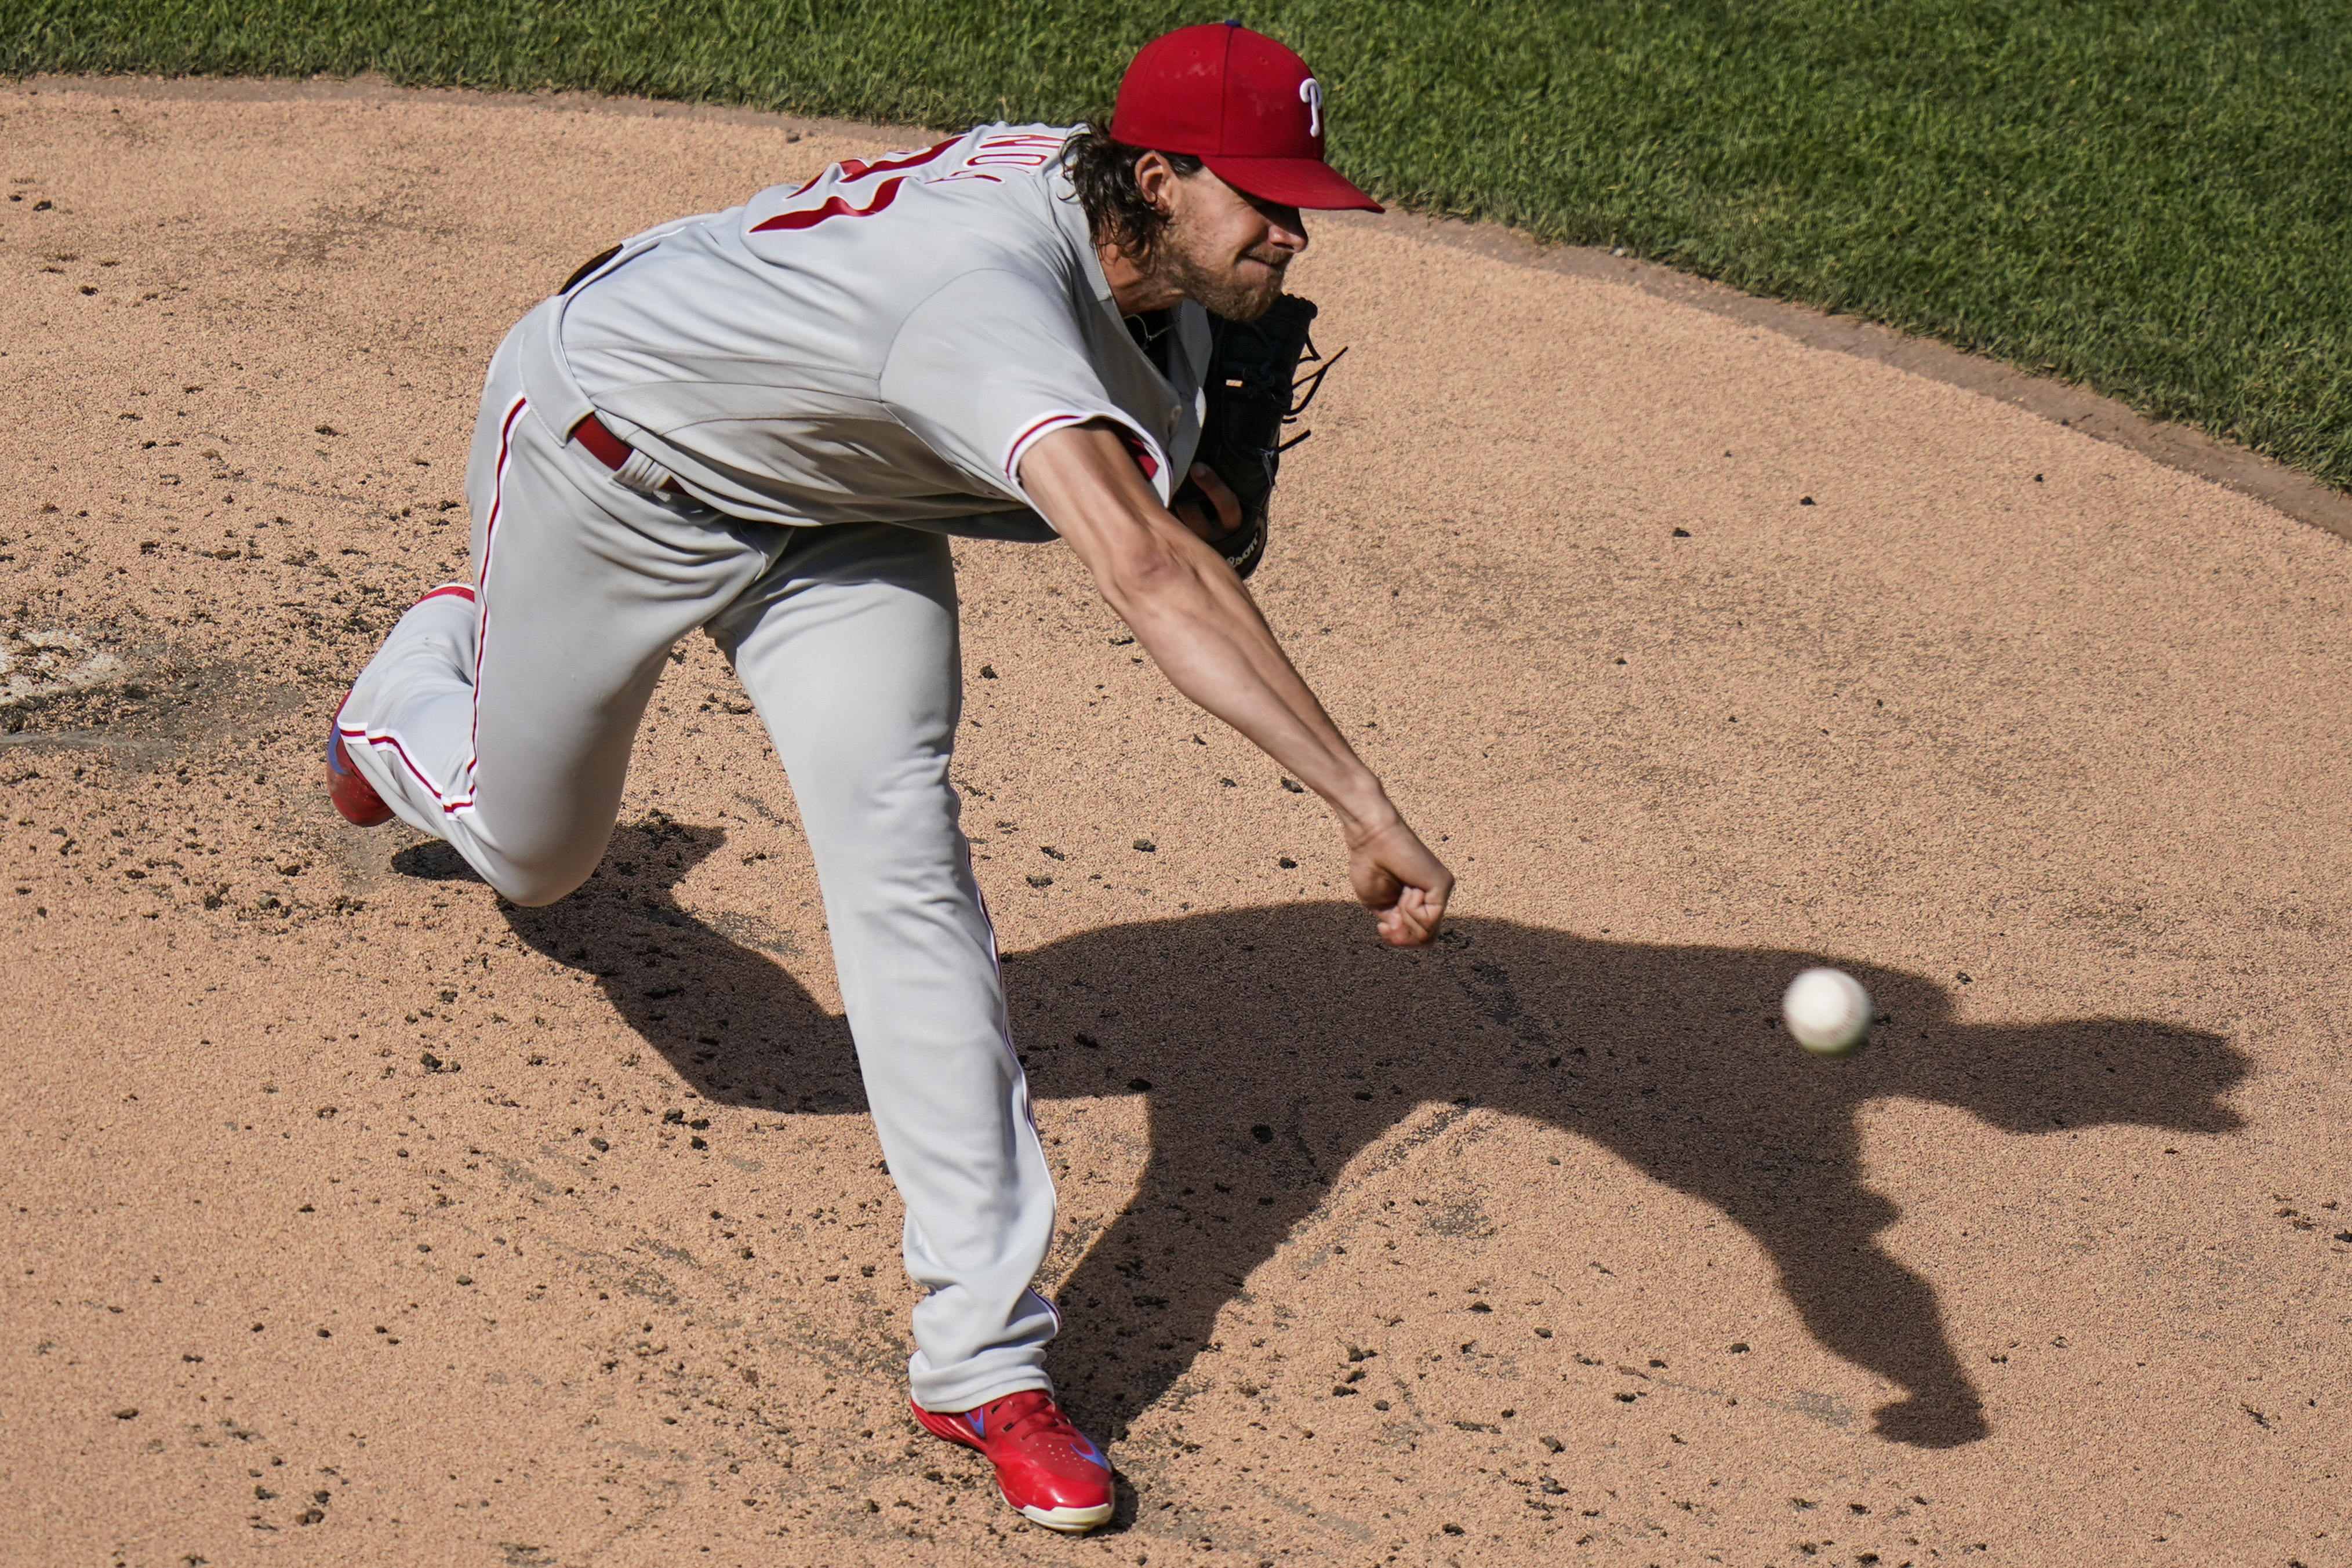 Boston Red Sox Pitcher Mauricio Llovera throws a pitch during the MLB  News Photo - Getty Images